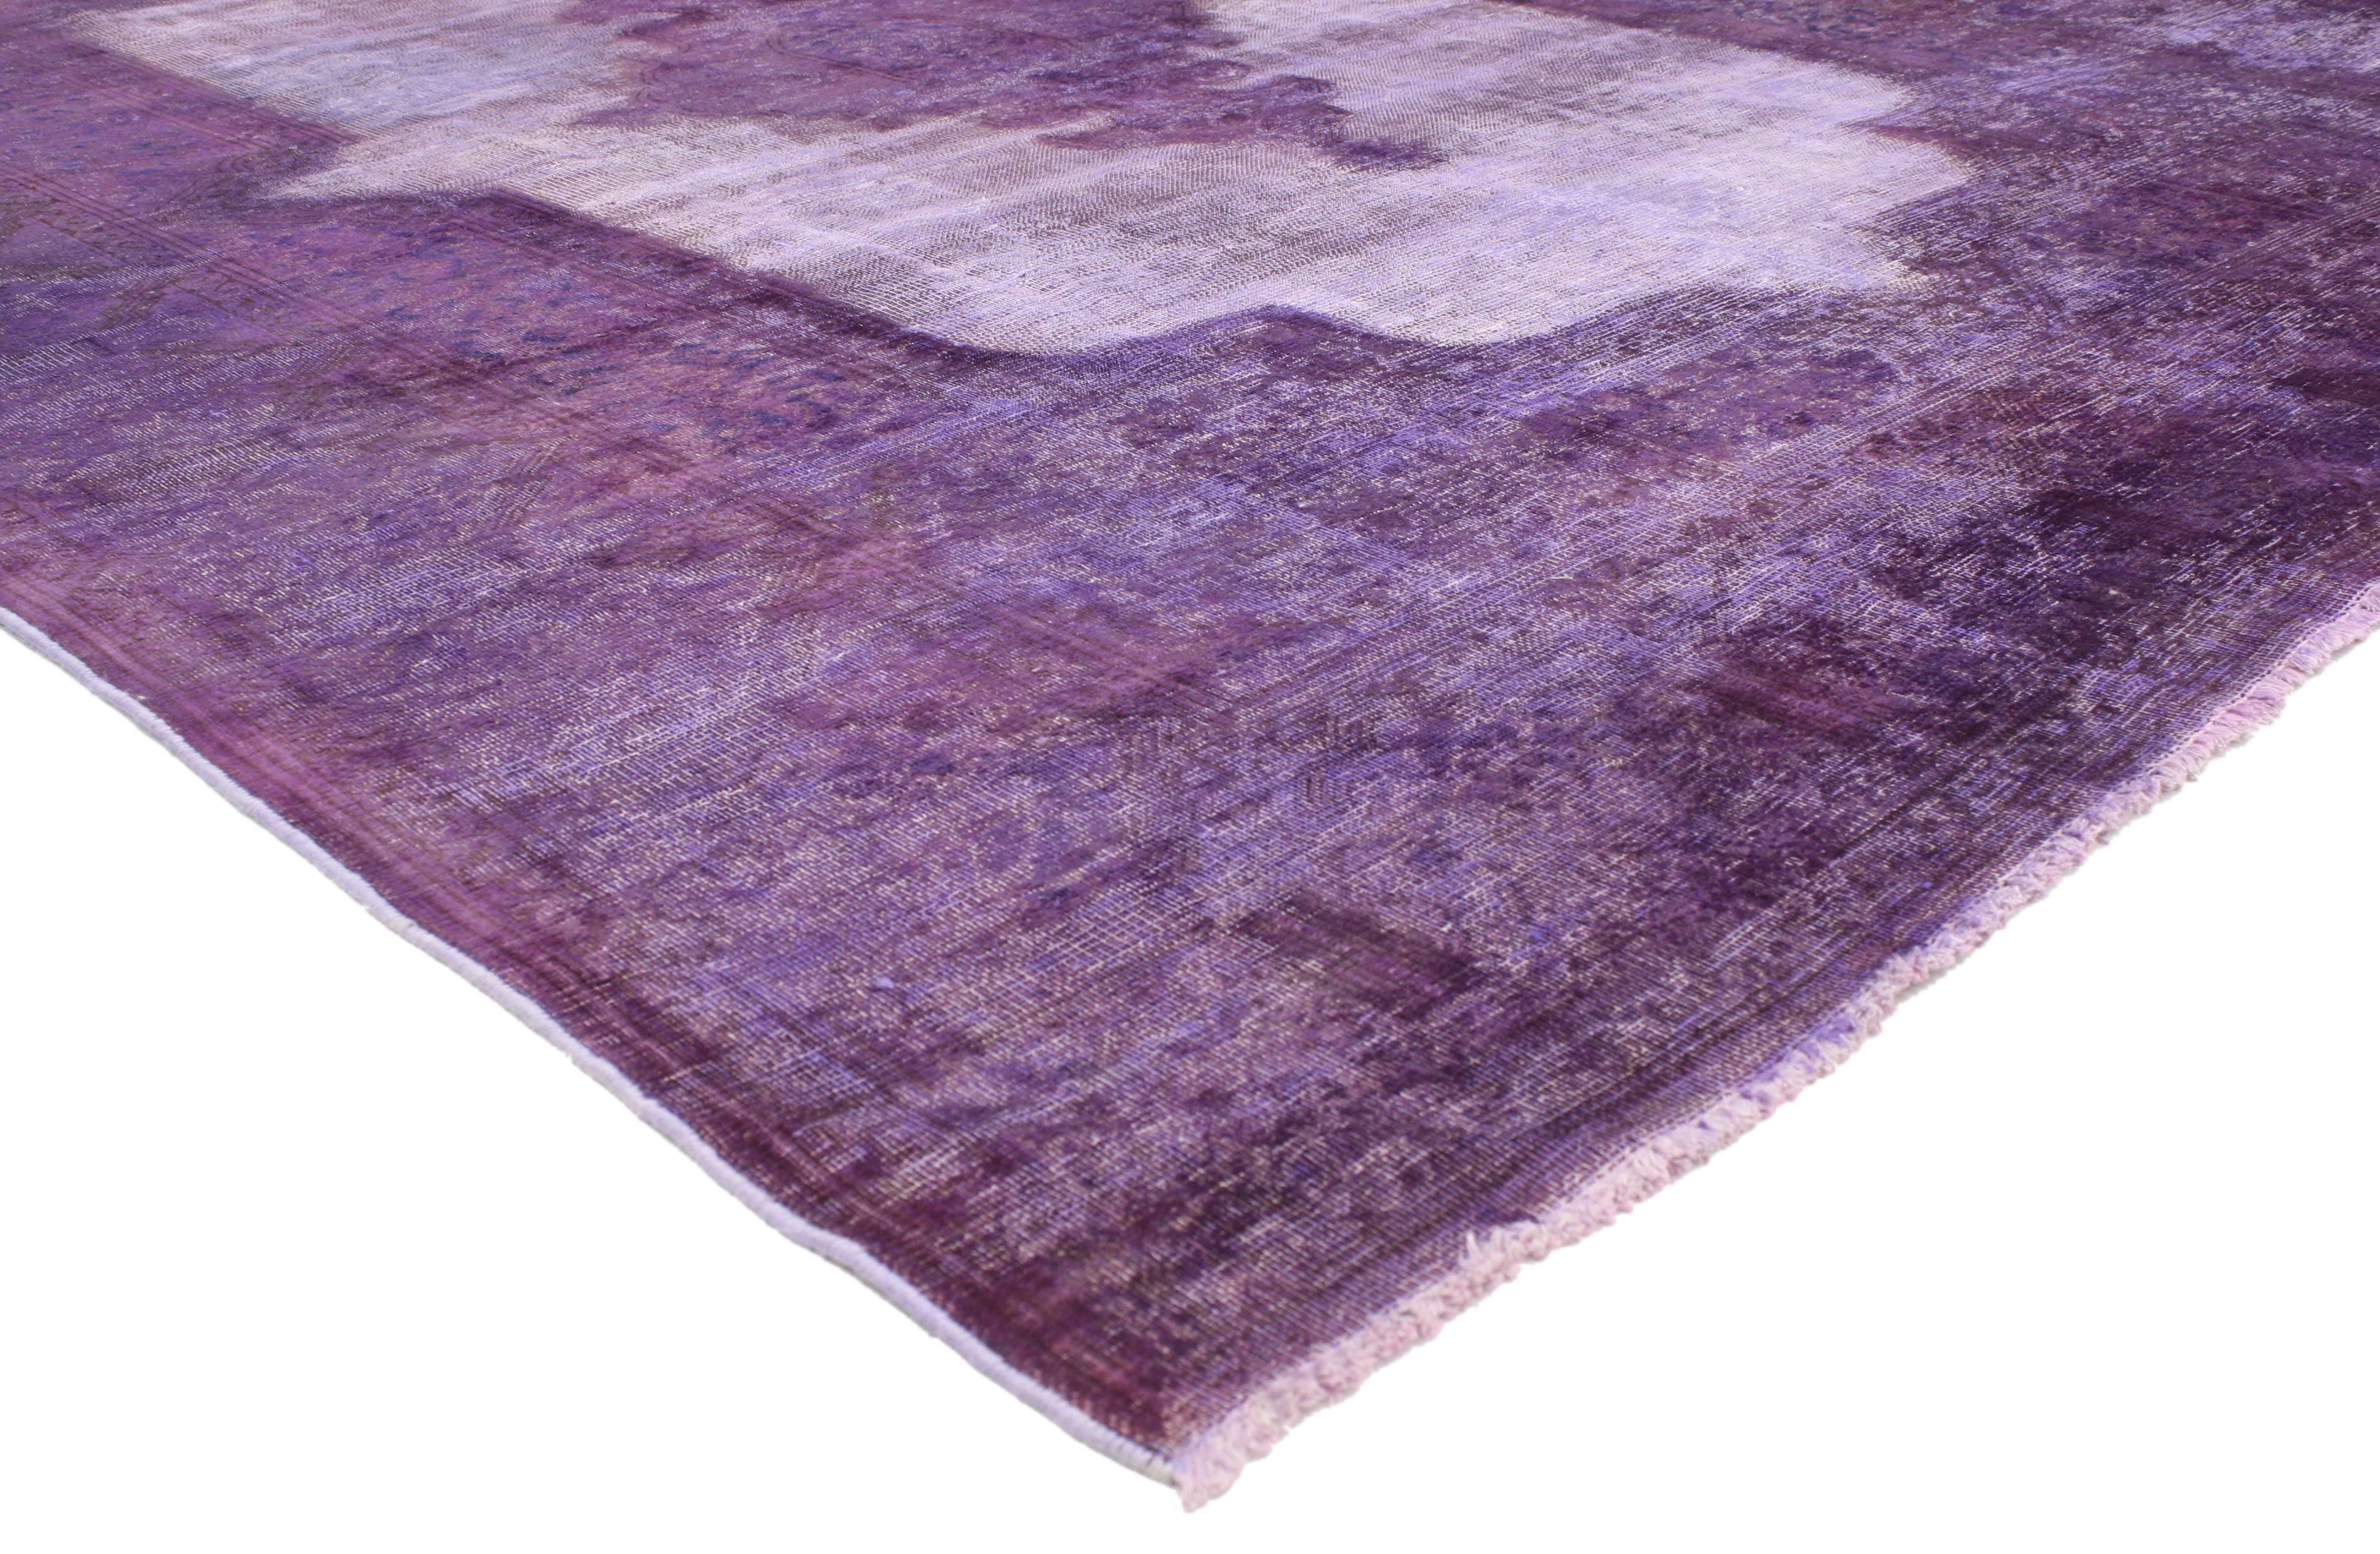 80413 Distressed Overdyed Purple Persian Rug with Post-Modern Memphis Style 07'11 x 10'07. This hand-knotted wool distressed overdyed purple vintage Persian rug features center medallion in an open abrash field. With its Post-Modern Memphis Style